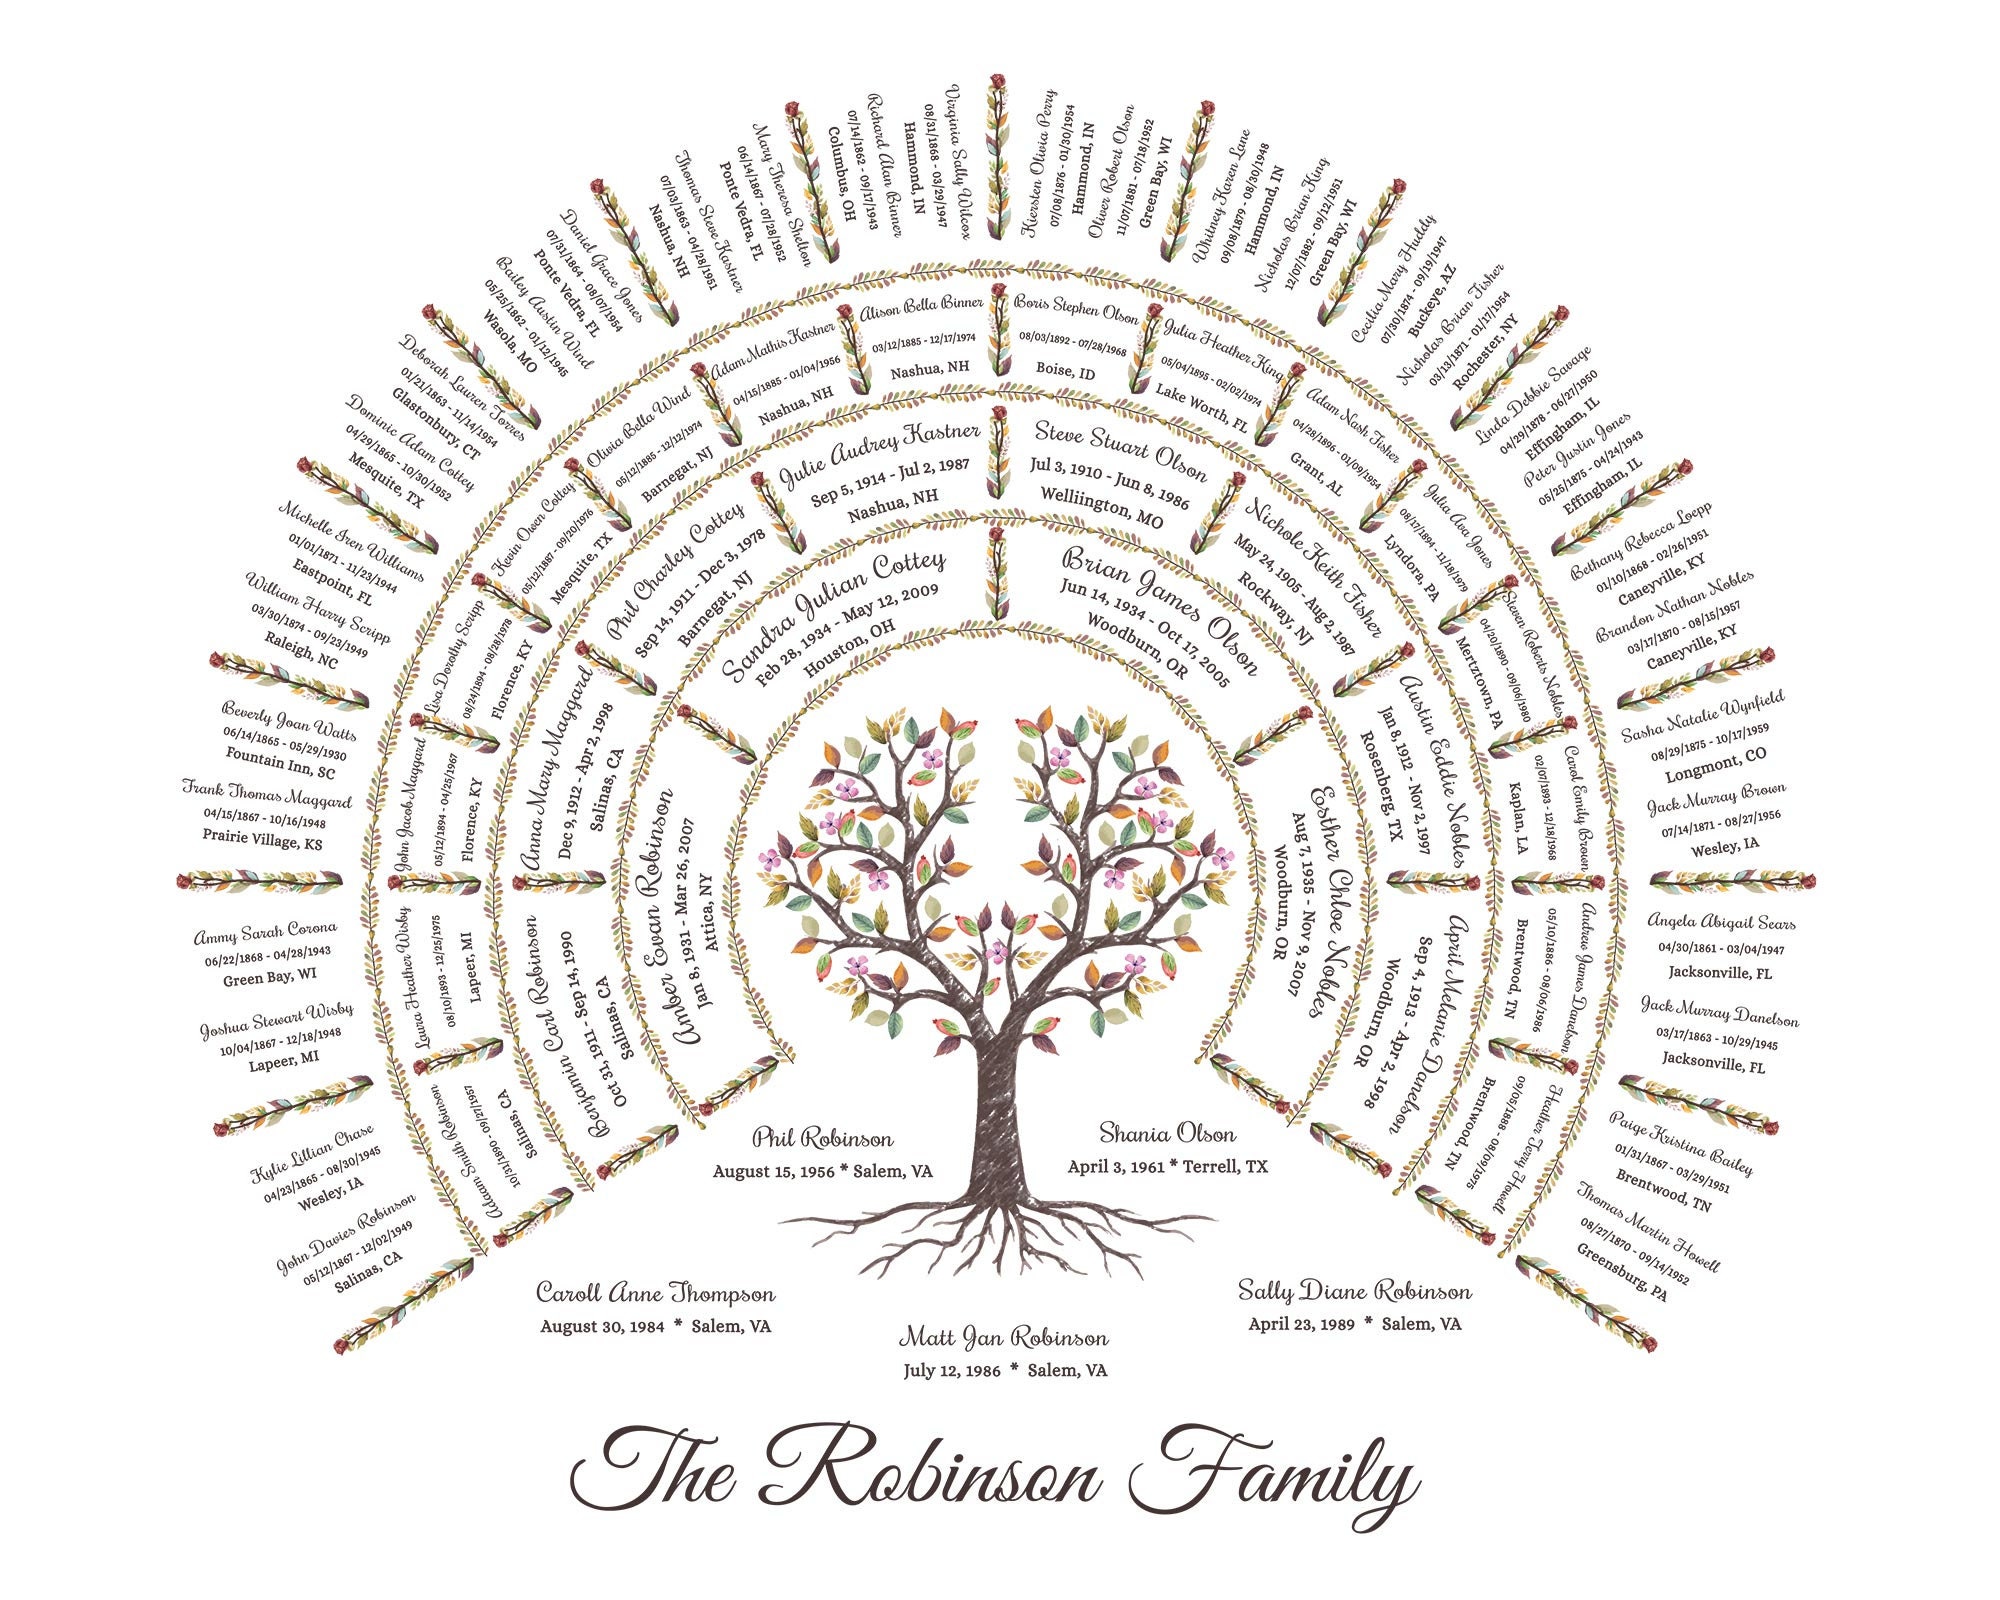 Fortify Your Family Tree: Free and Easy-to-Use 4-Generation Family Tree  Chart